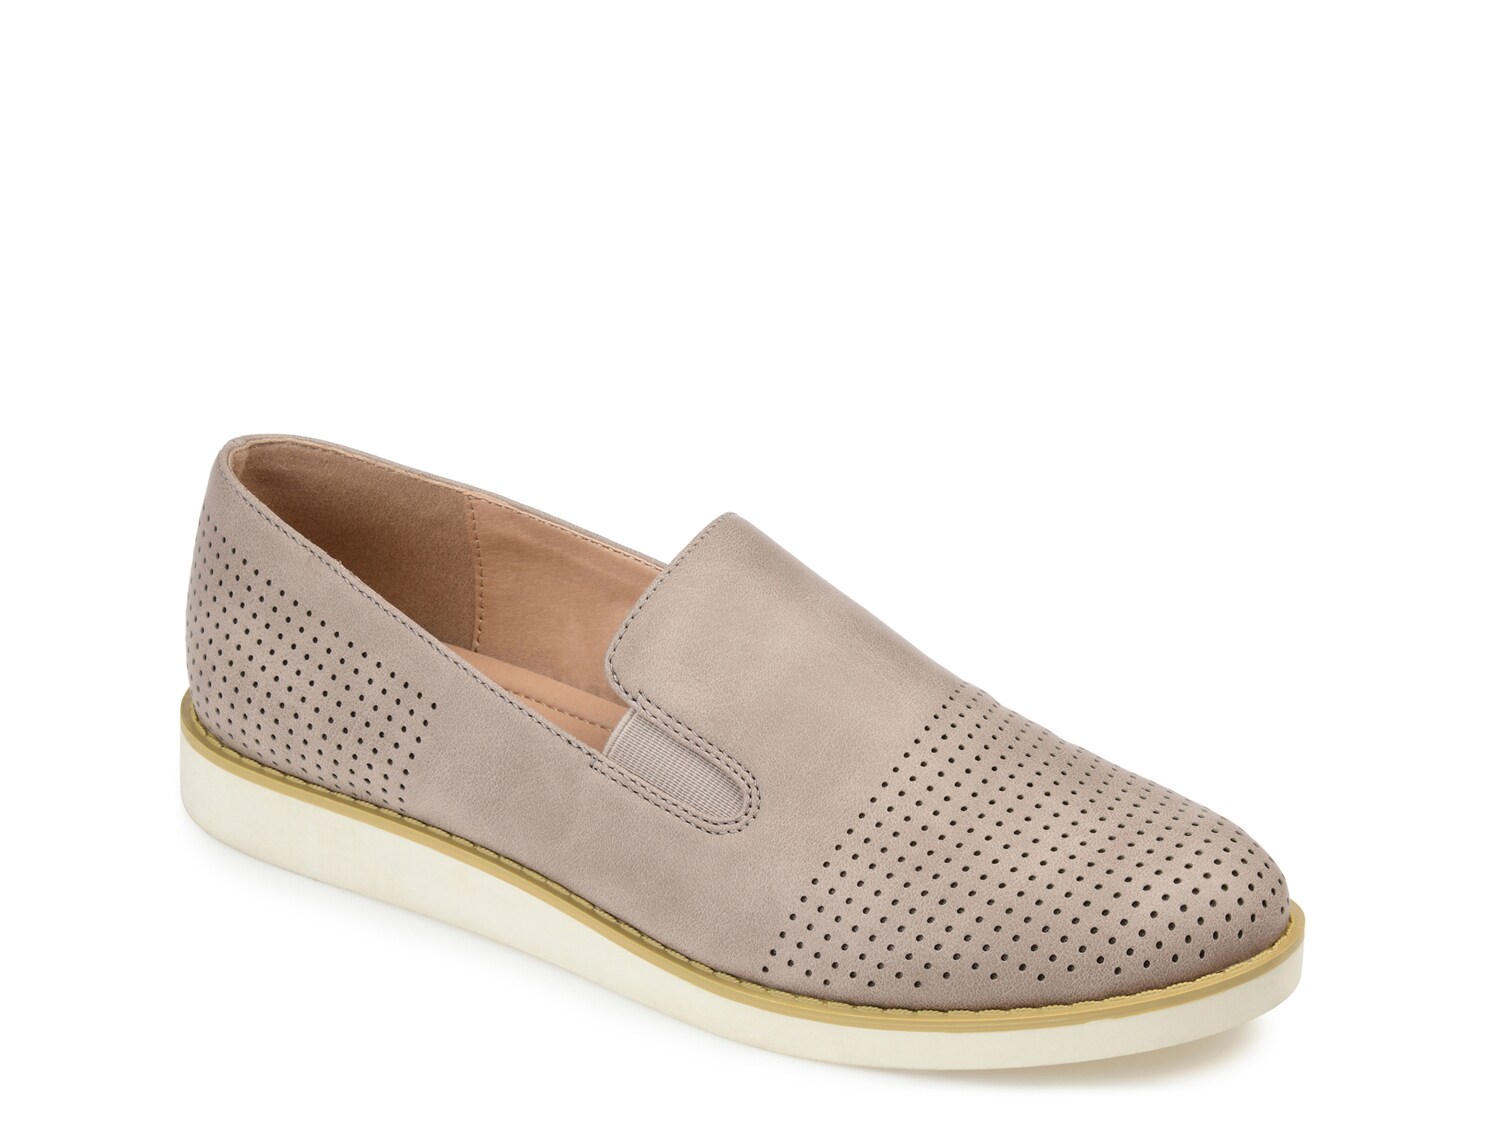 Journee Collection Britza Loafer - Free Shipping | DSW